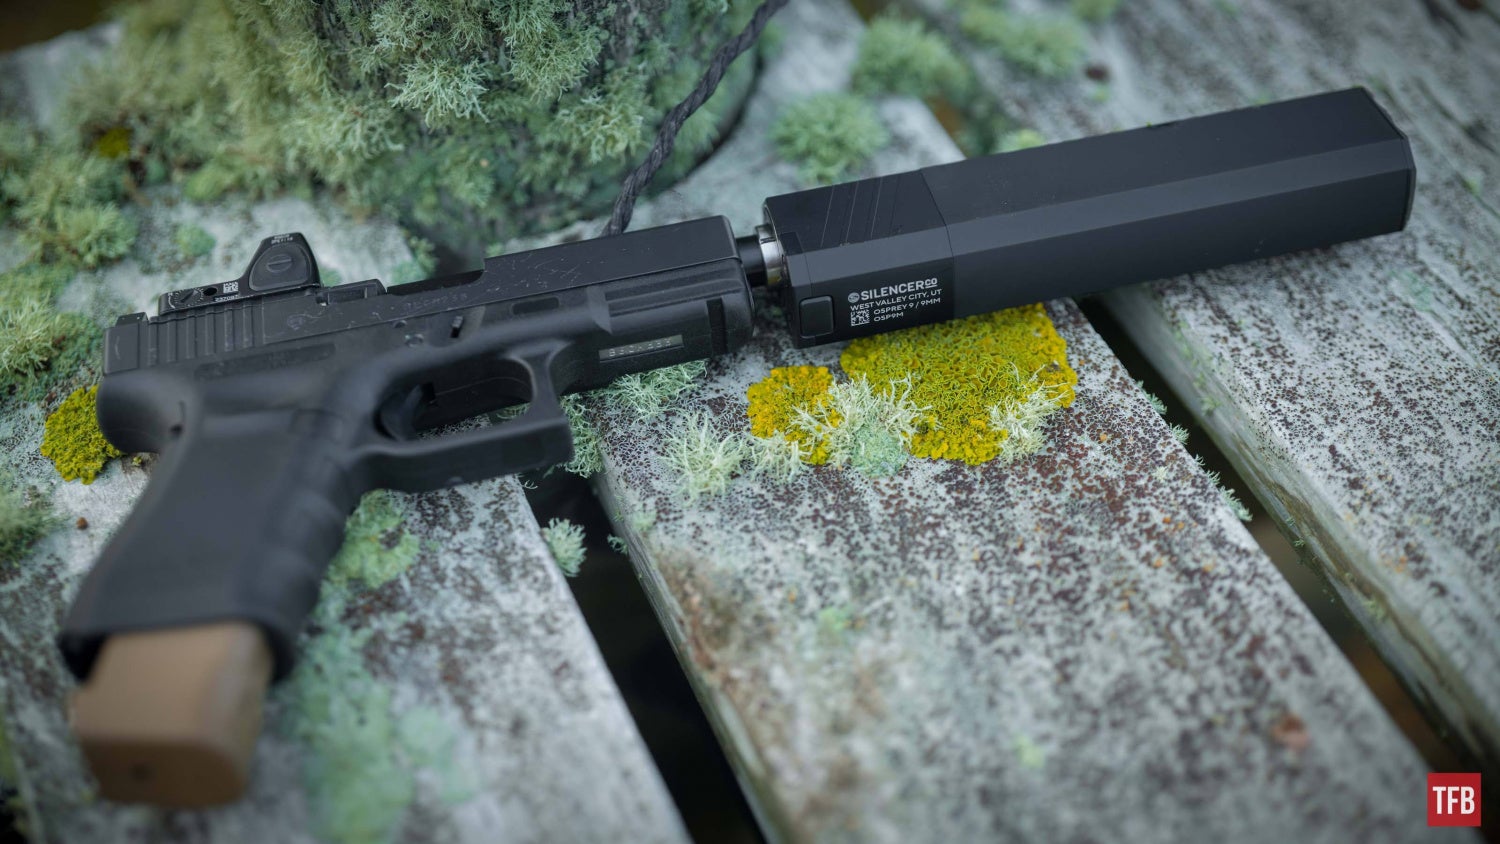 SILENCER SATURDAY #240: The New SilencerCo Osprey 2.0 - Pushbutton Indexing